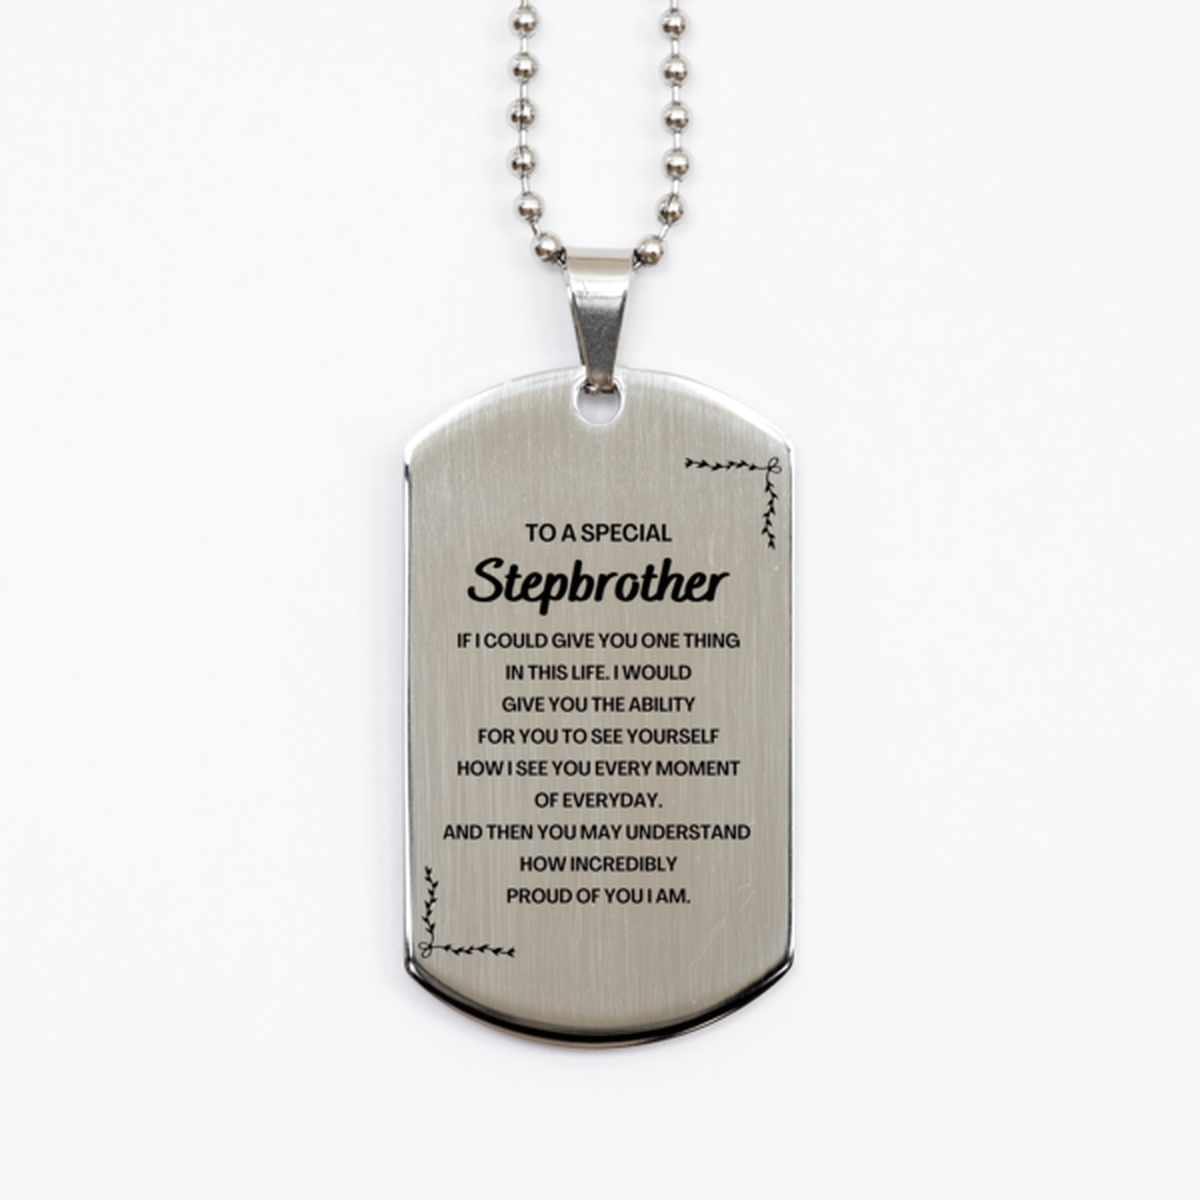 To My Stepbrother Silver Dog Tag, Gifts For Stepbrother Engraved, Inspirational Gifts for Christmas Birthday, Epic Gifts for Stepbrother To A Special Stepbrother how incredibly proud of you I am